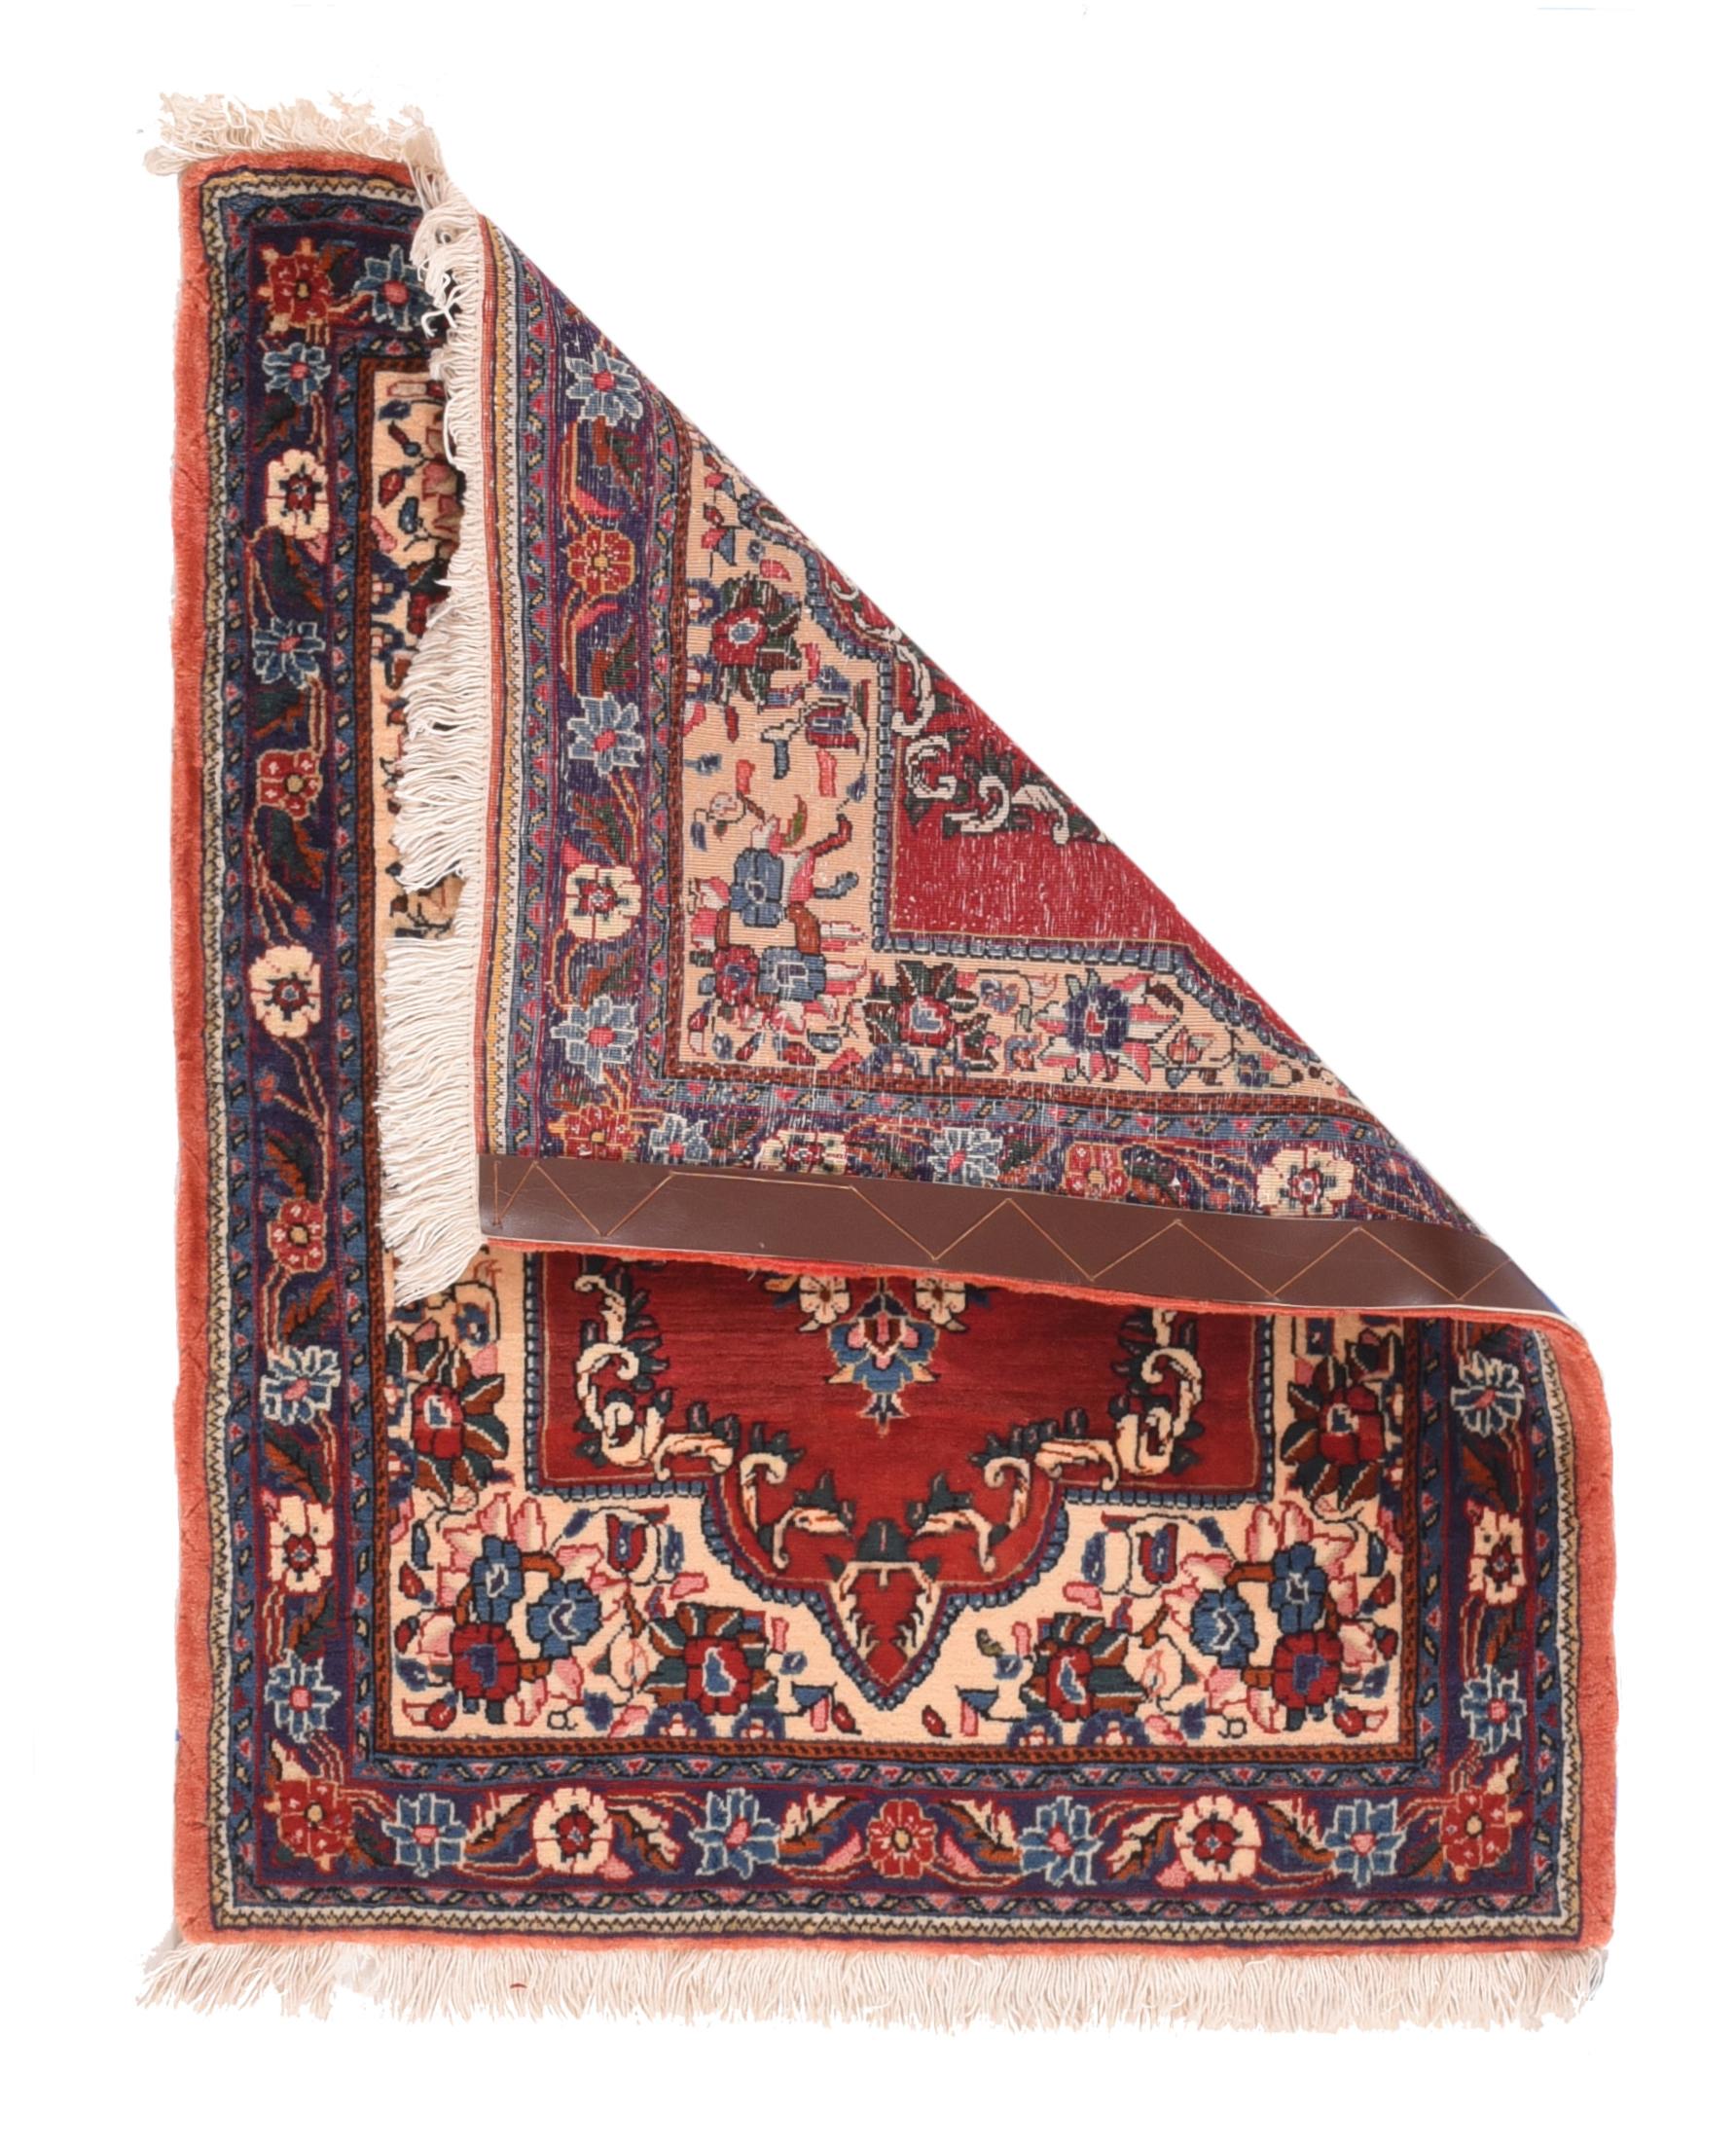 Vintage Sarouk rug¬†2'2'' x 2'9''. This finely woven urban ruglet shows a creamy sand field with various rosette modules, framing the lipstick red central octogramme subfield with an acanthus wreath around a cerulean blue medallion sprouting